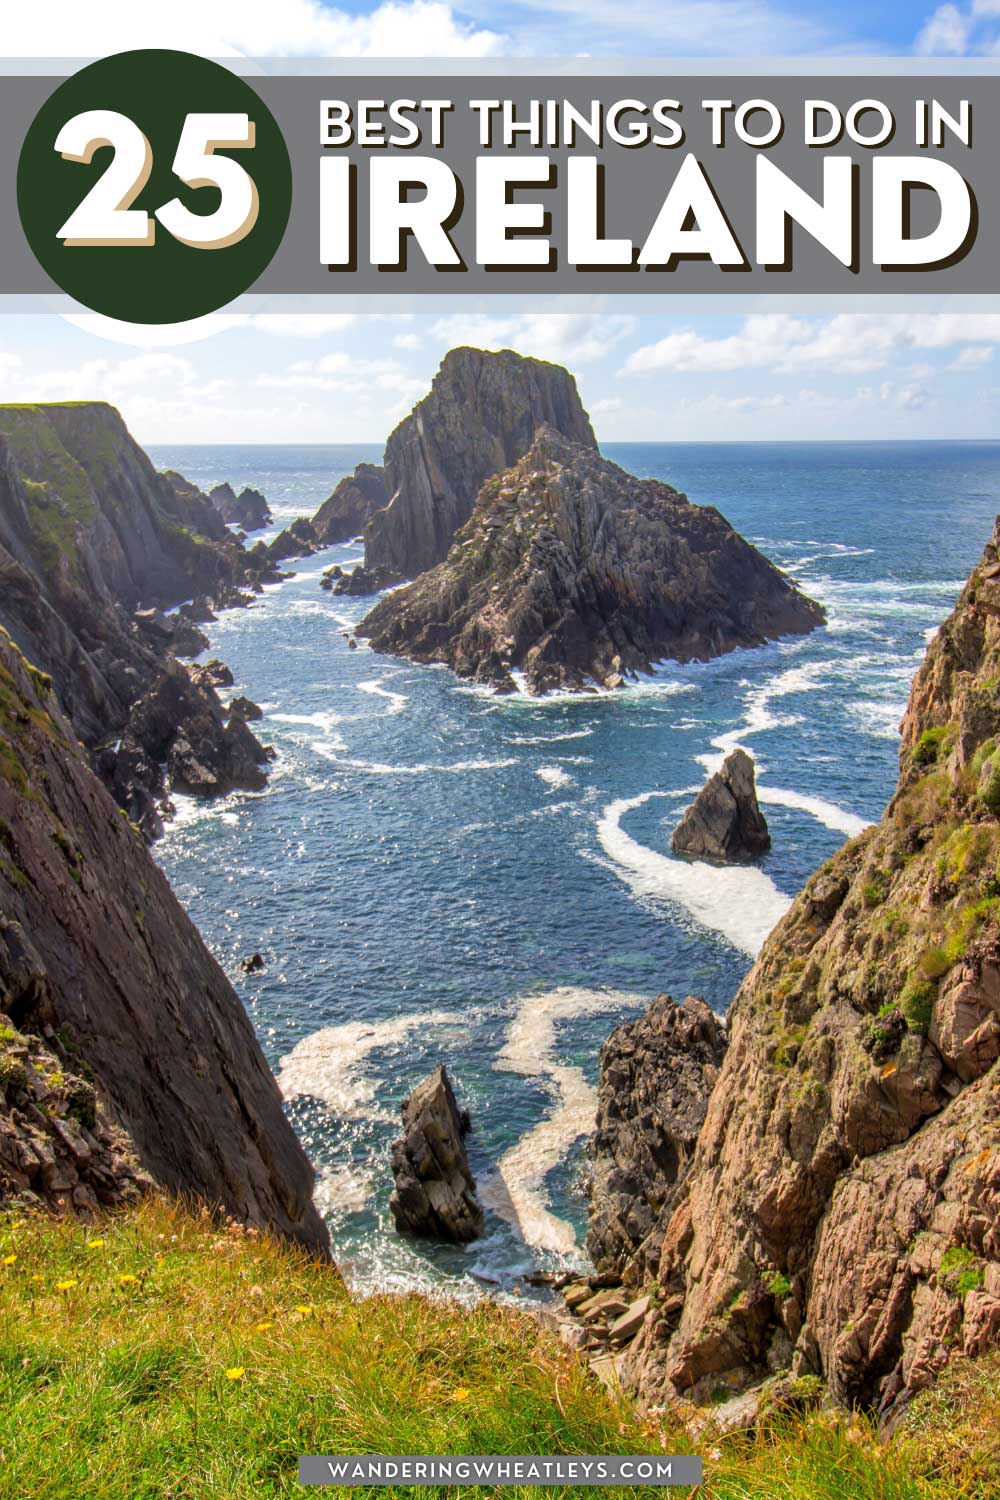 The Best Things to do in Ireland